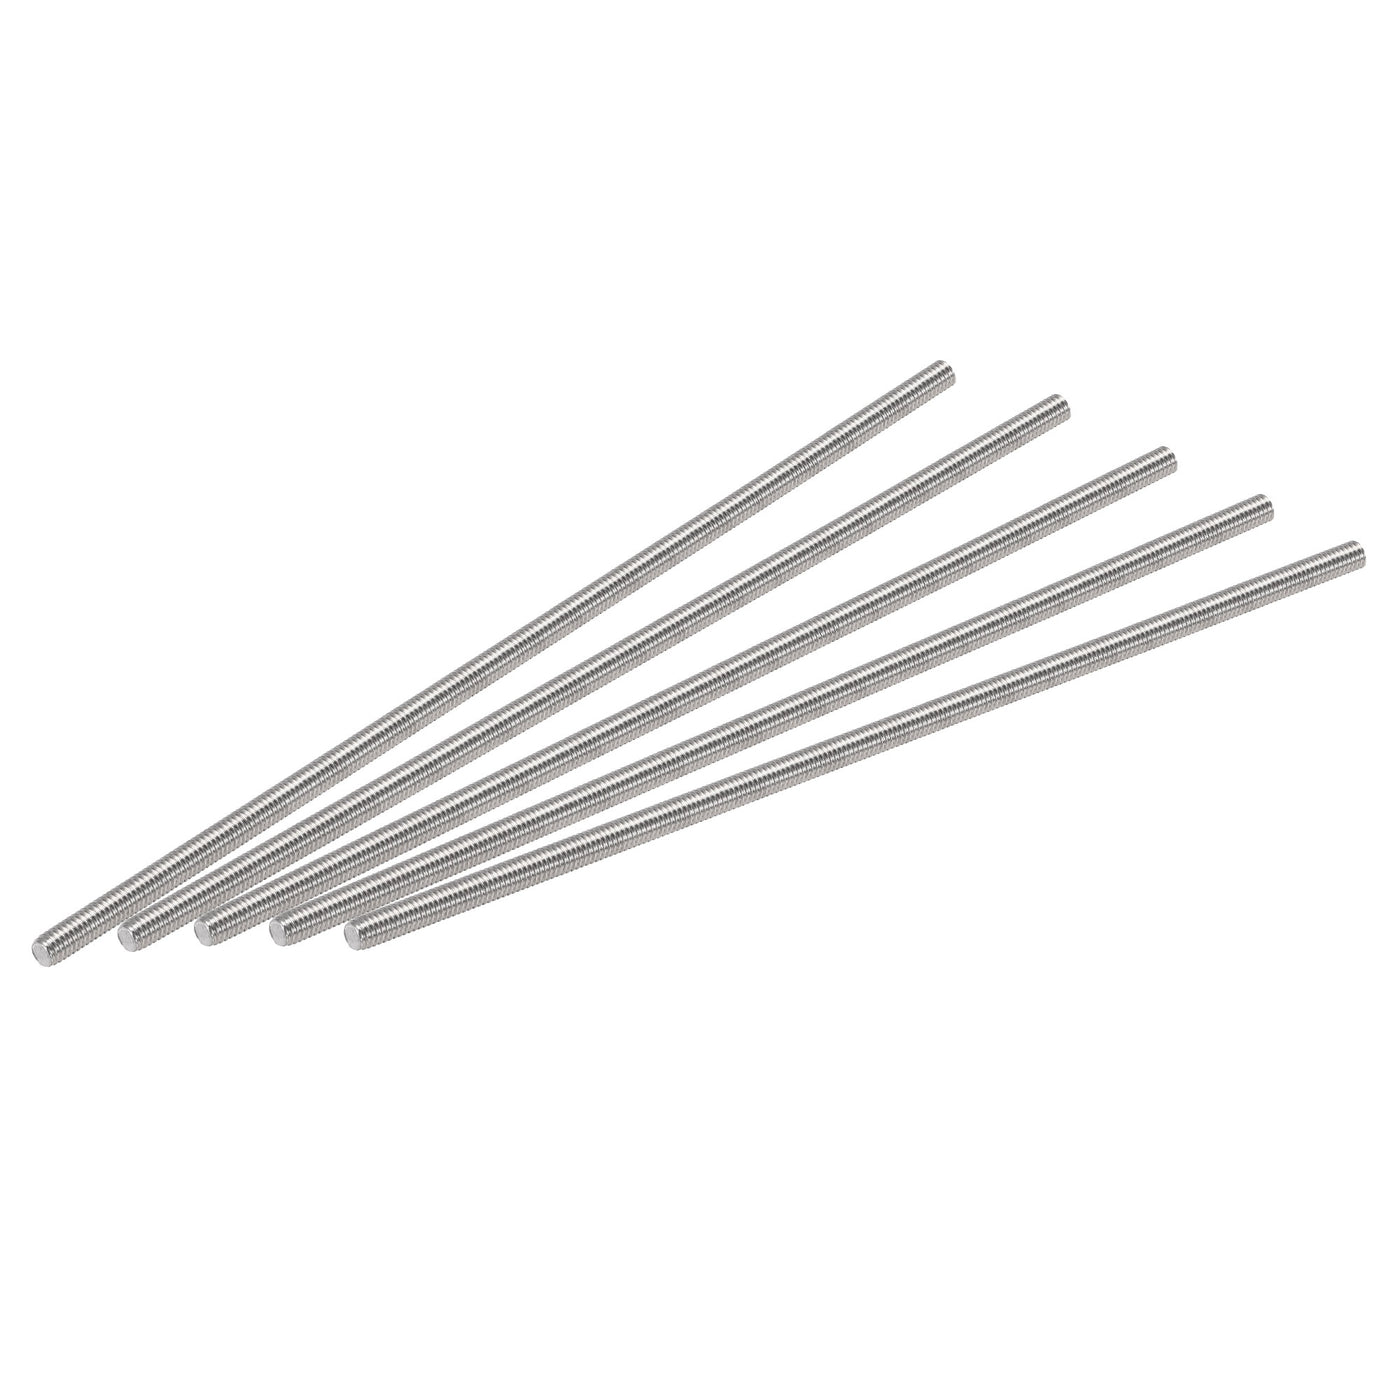 uxcell Uxcell 15pcs M3 x 100mm Fully Threaded Rod 304 Stainless Steel Right Hand 0.5mm Pitch